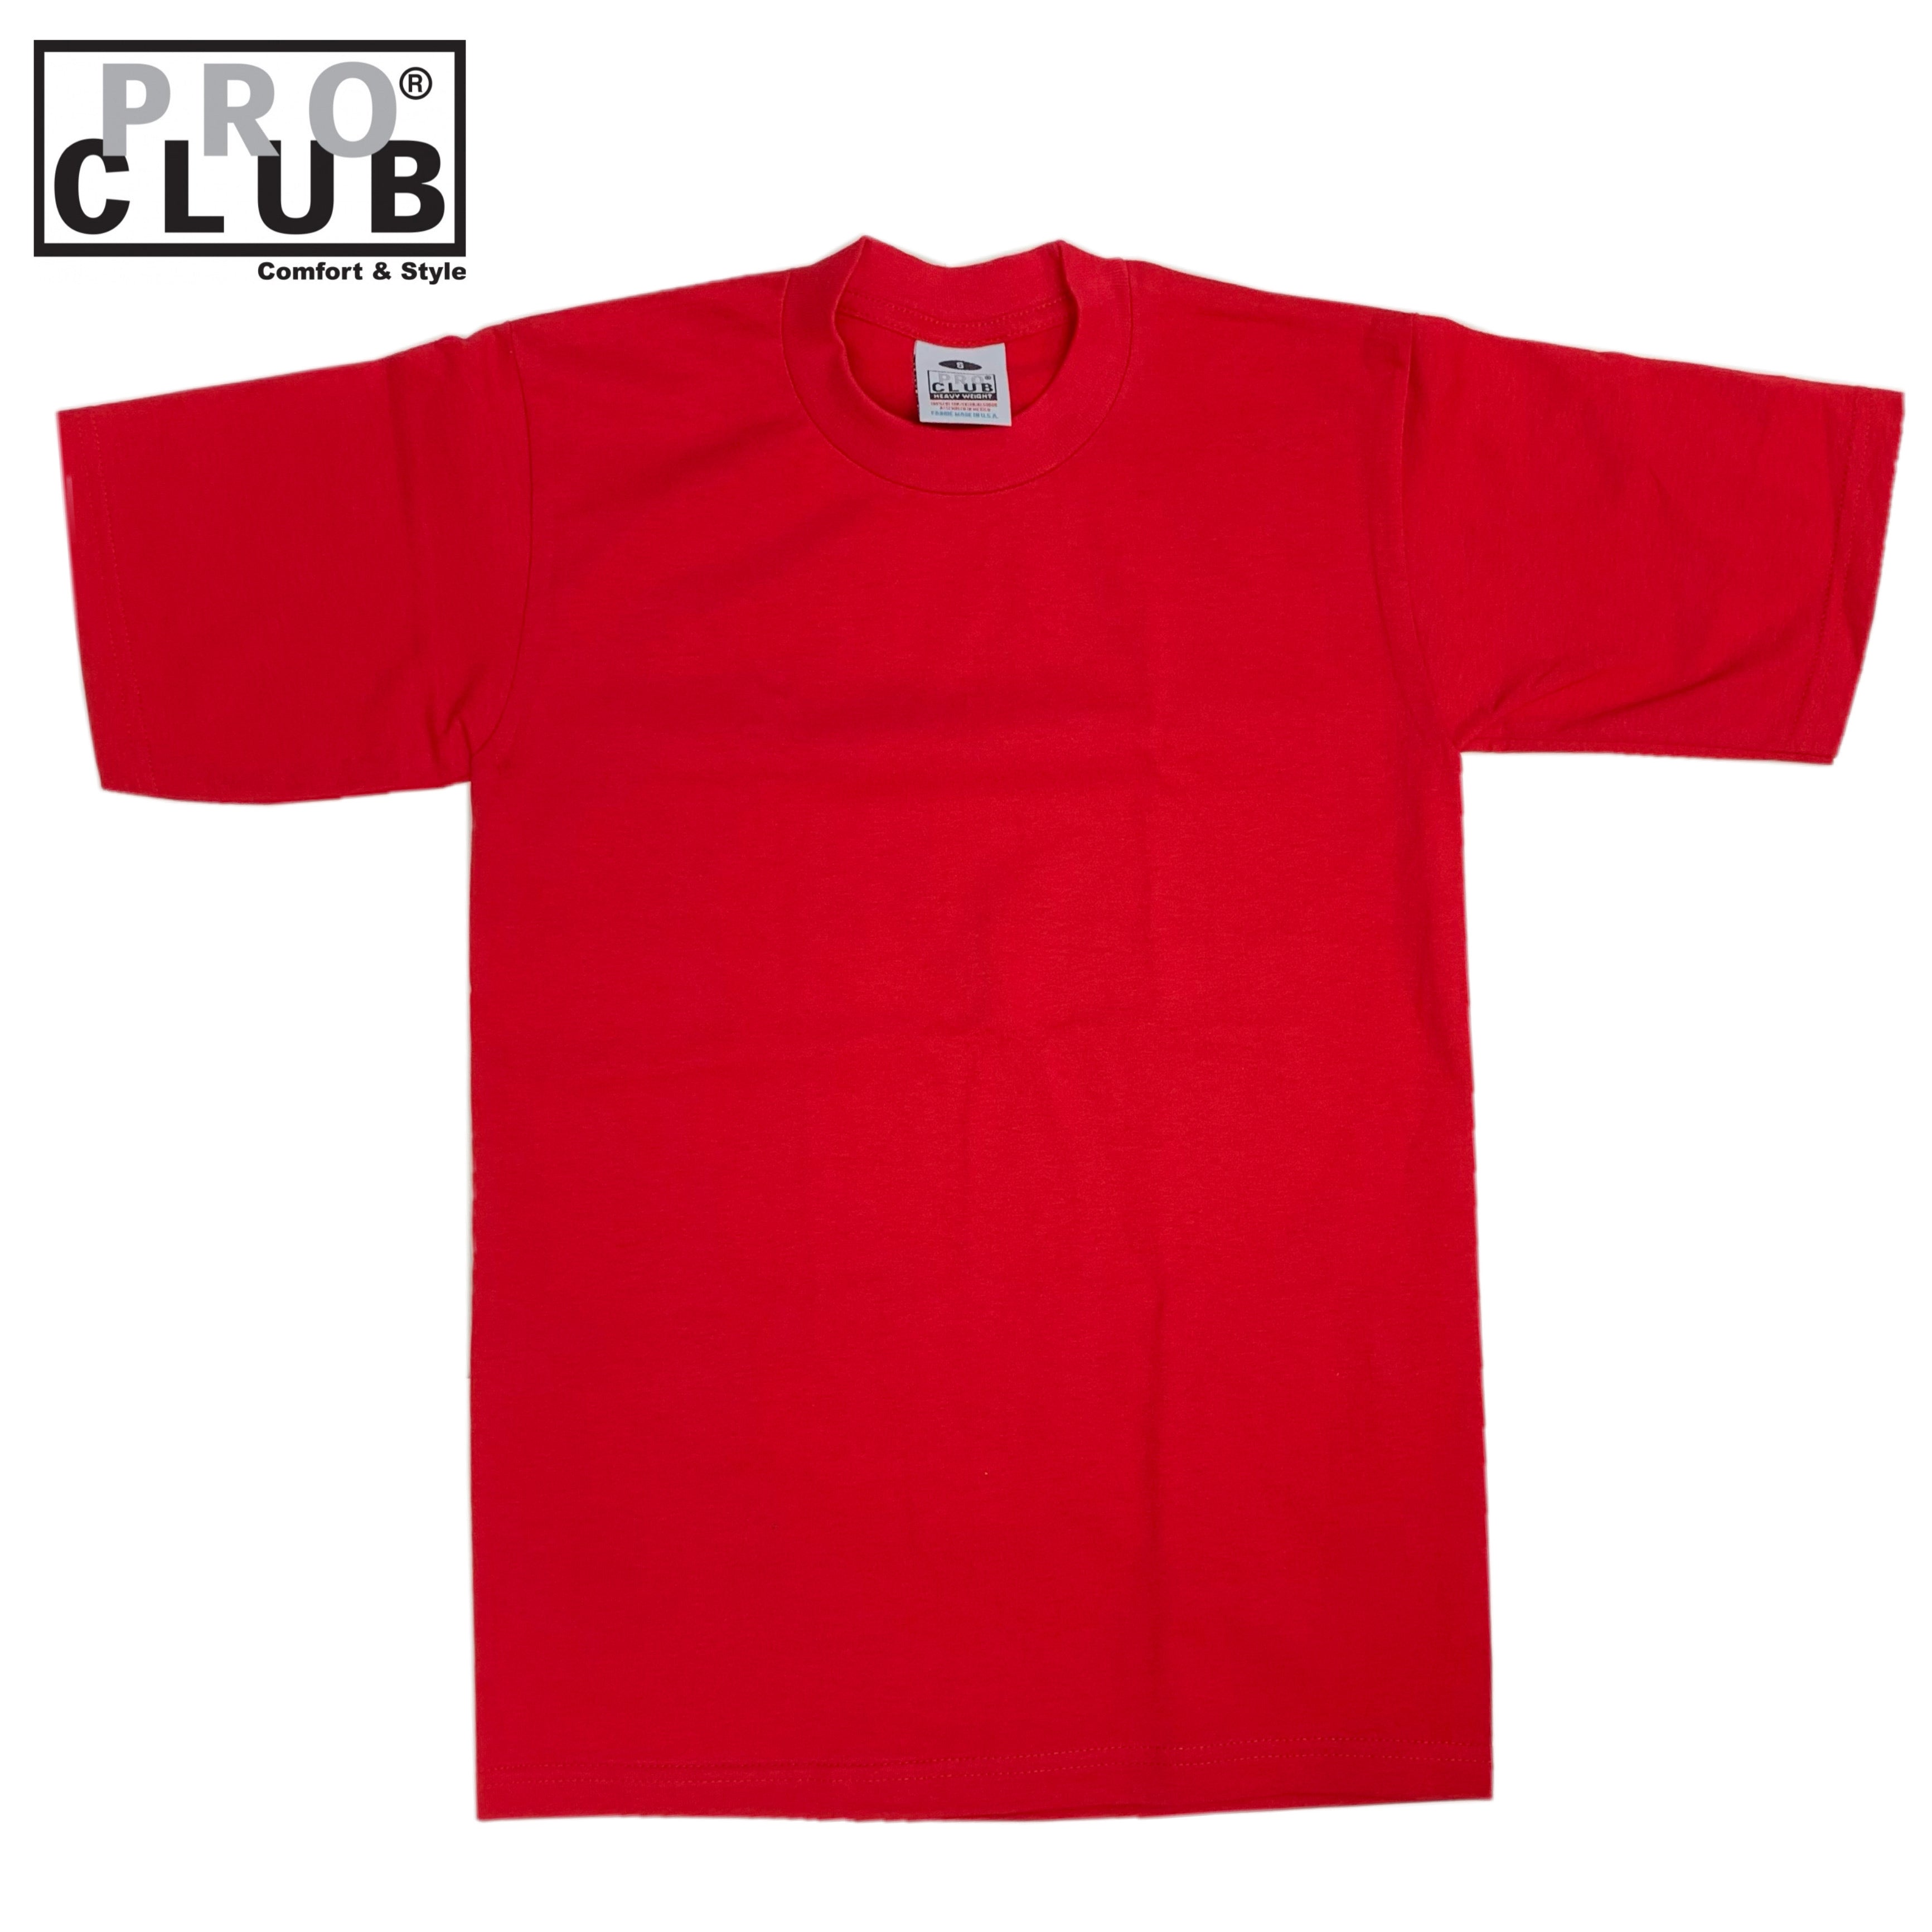 Dressing Up Pro Club T-Shirts for Semi-Formal Events